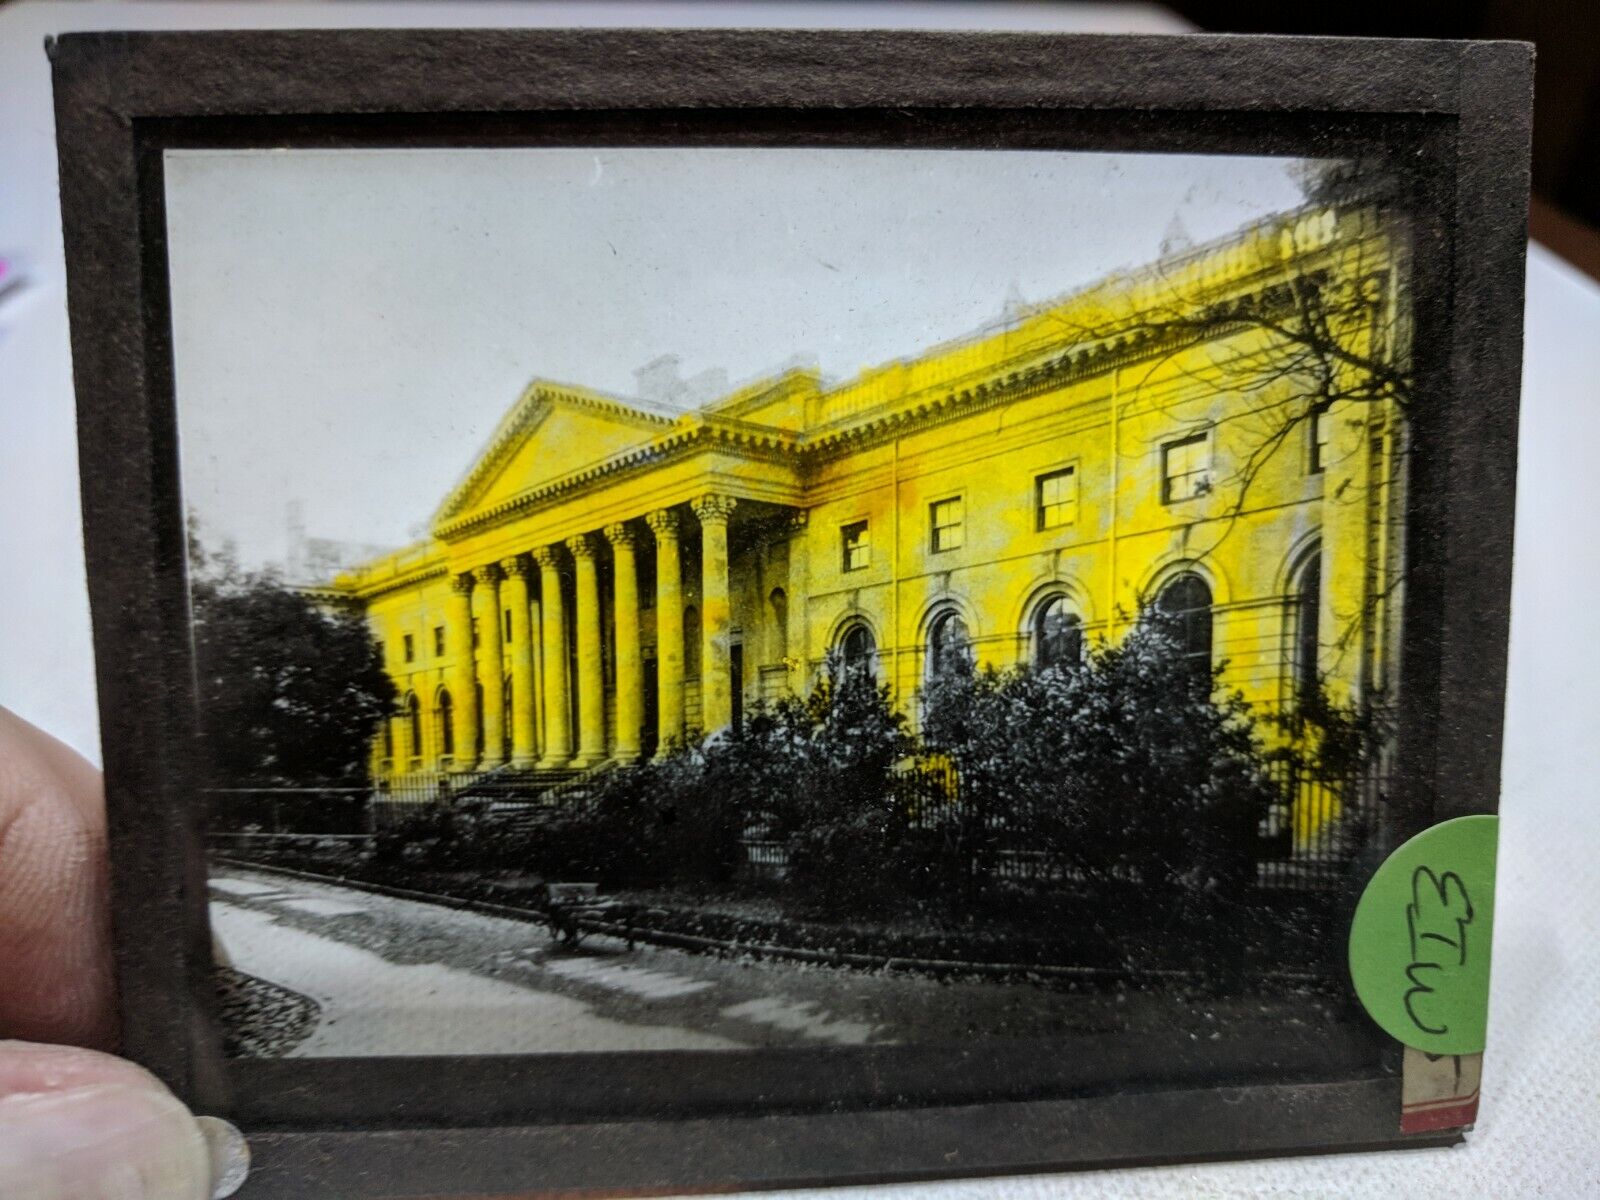 HISTORIC Glass Magic Lantern Slide EIW government building painted gold